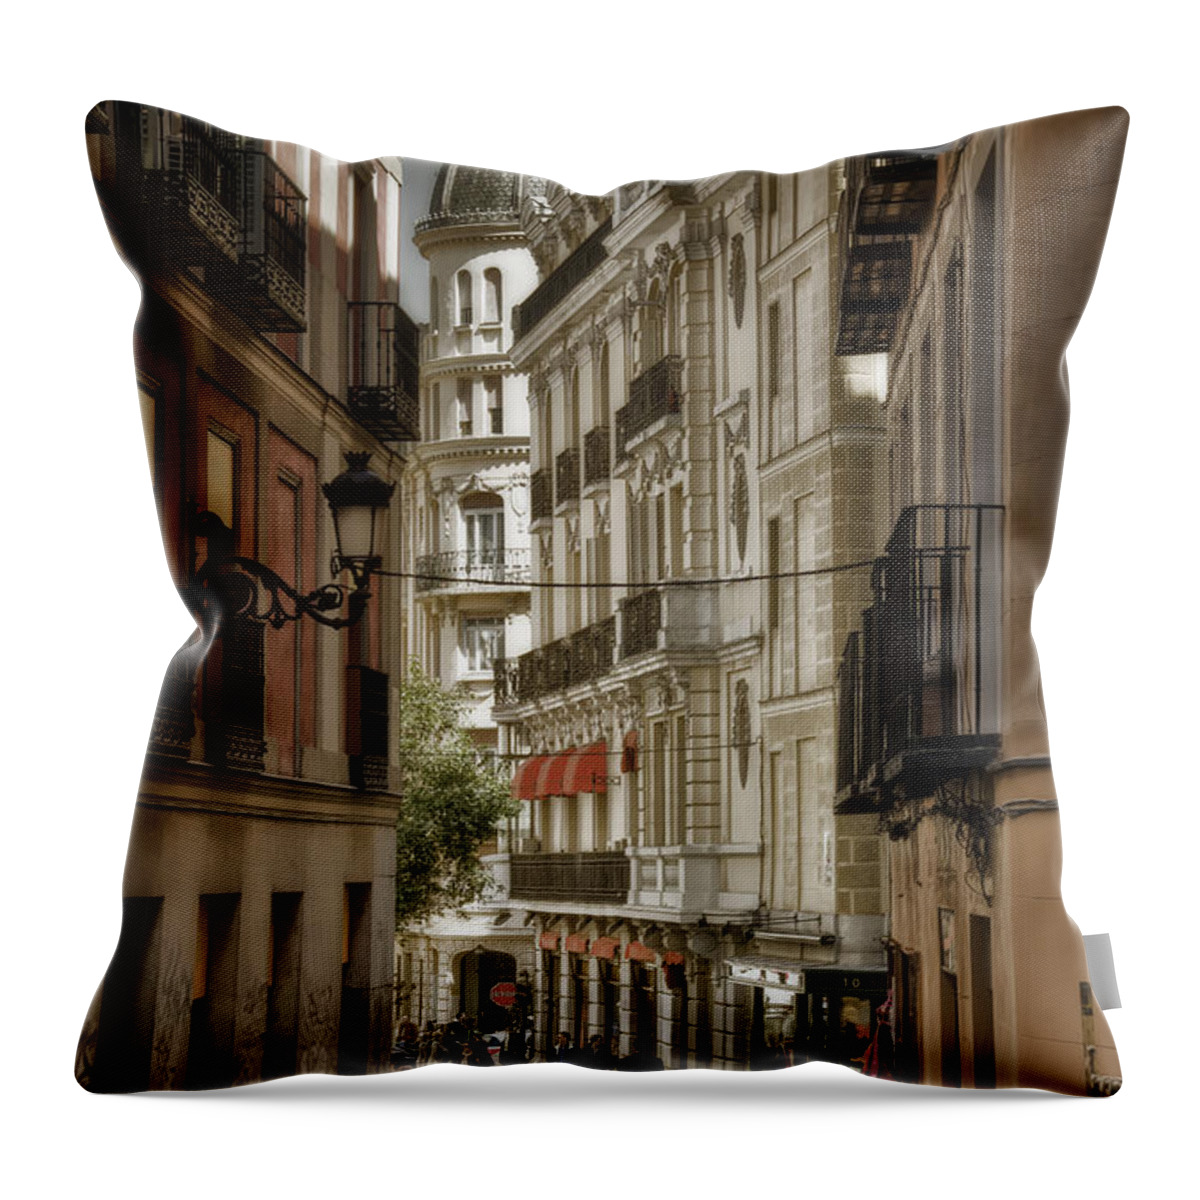 City Throw Pillow featuring the photograph Madrid Streets by Joan Carroll